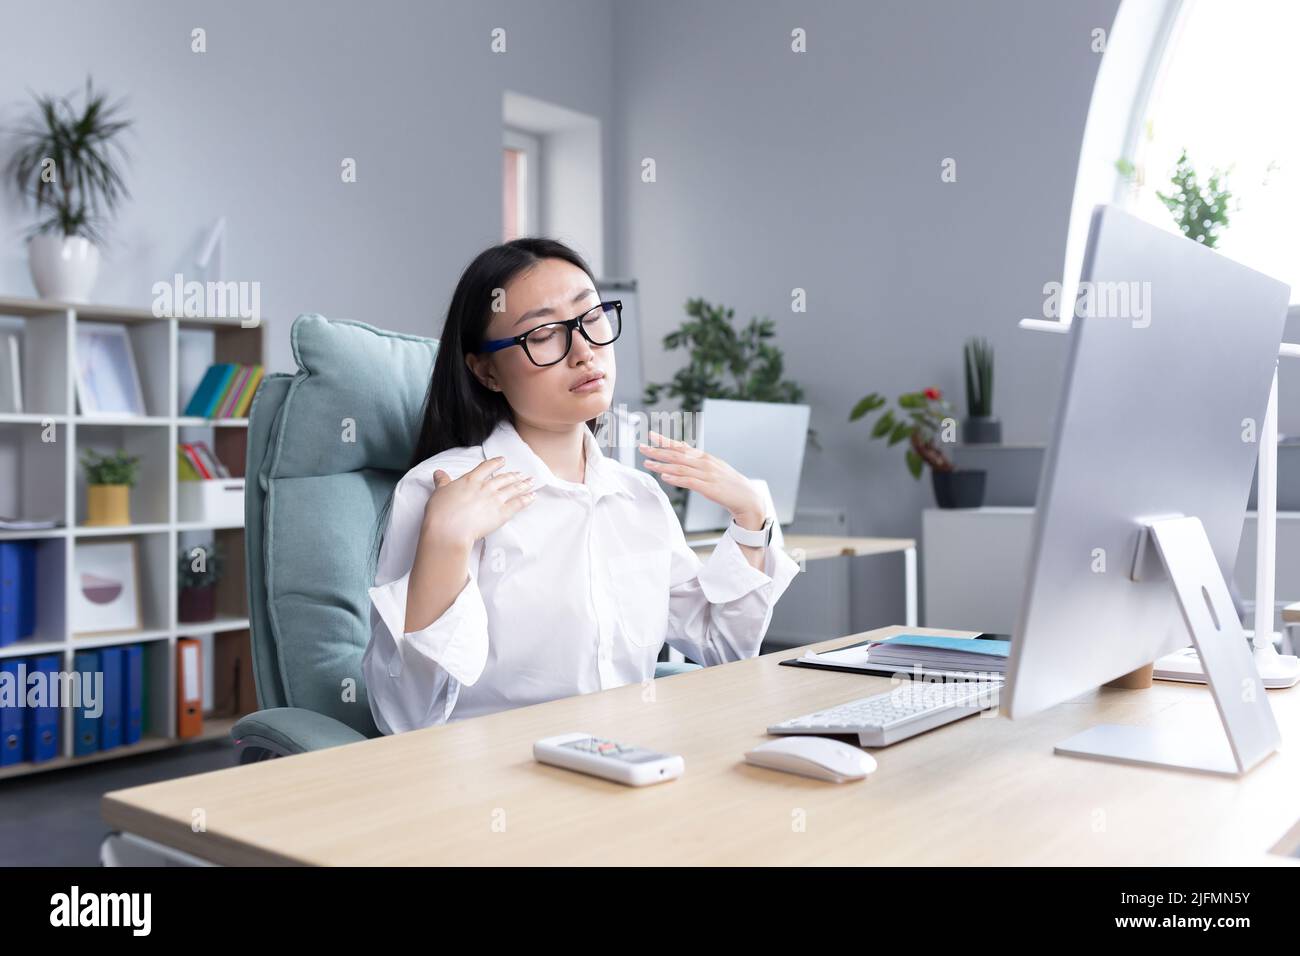 Heat in the office, Asian woman trying to freshen up, business woman working at the computer, waving her hands to cool down. Stock Photo